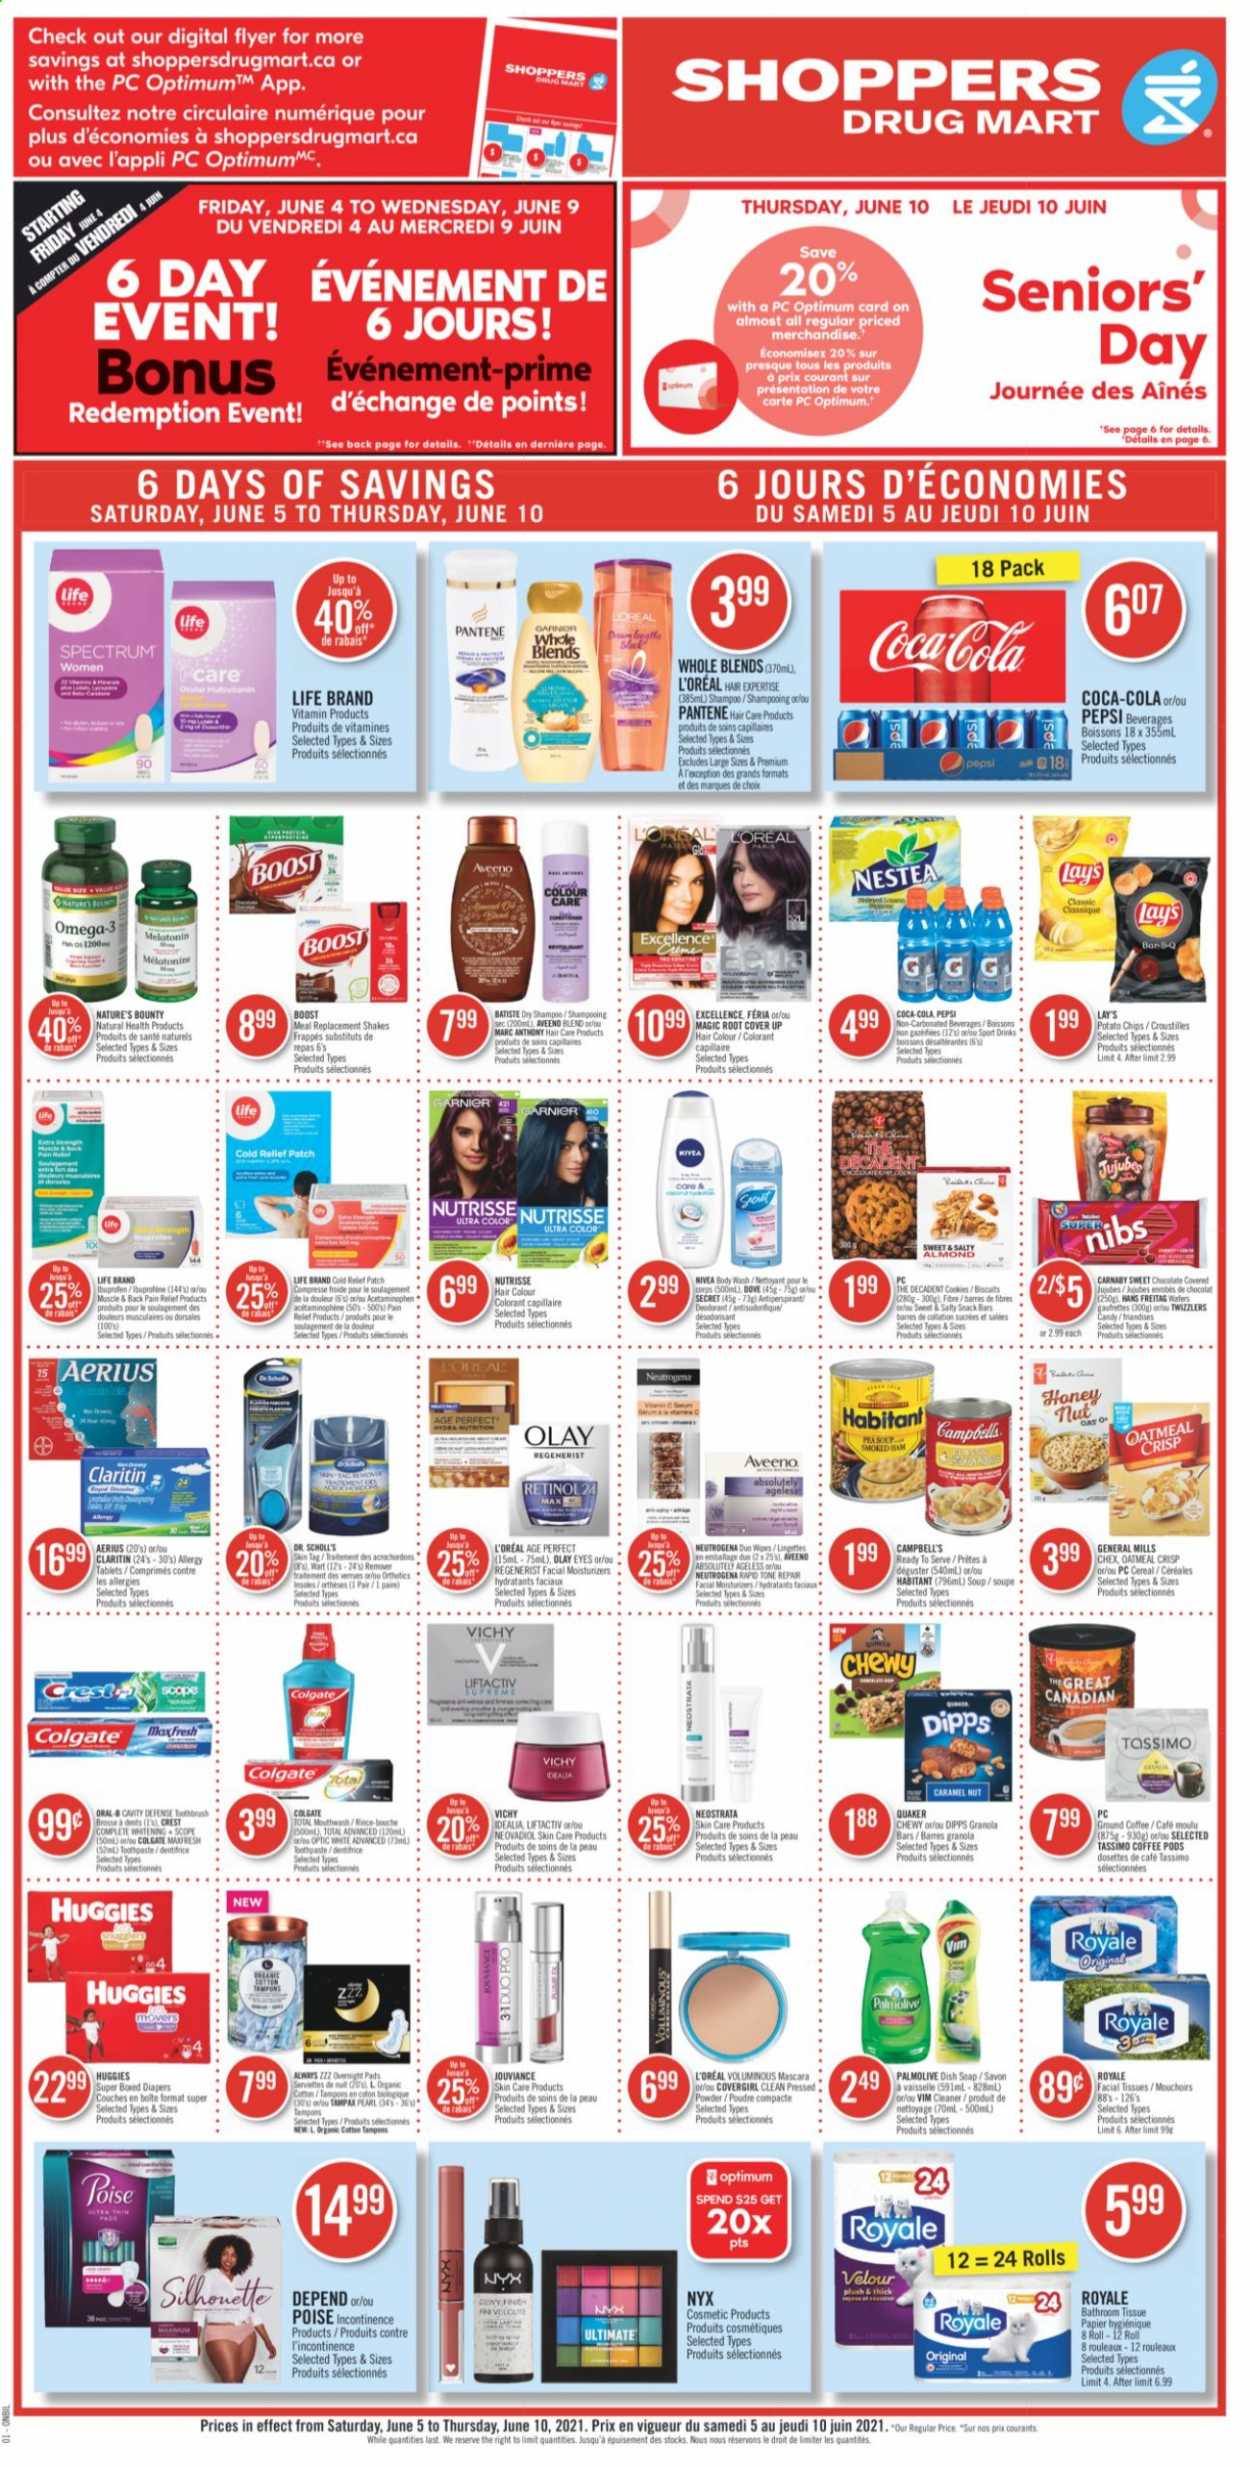 thumbnail - Shoppers Drug Mart Flyer - June 05, 2021 - June 10, 2021 - Sales products - wafers, snack, biscuit, snack bar, potato chips, Lay’s, oatmeal, oats, soup, cereals, granola bar, Quaker, Campbell's, caramel, Coca-Cola, Pepsi, Boost, coffee pods, ground coffee, wipes, nappies, Aveeno, bath tissue, cleaner, body wash, Vichy, Palmolive, soap, toothbrush, toothpaste, mouthwash, Crest, sanitary pads, tampons, facial tissues, L’Oréal, moisturizer, Olay, NYX Cosmetics, hair color, anti-perspirant, face powder, pain relief, Nature's Bounty, Ibuprofen, Omega-3, Spectrum, Dr. Scholl's, mascara, Neutrogena, shampoo, Tampax, Huggies, Pantene, Nivea, chips, deodorant. Page 1.